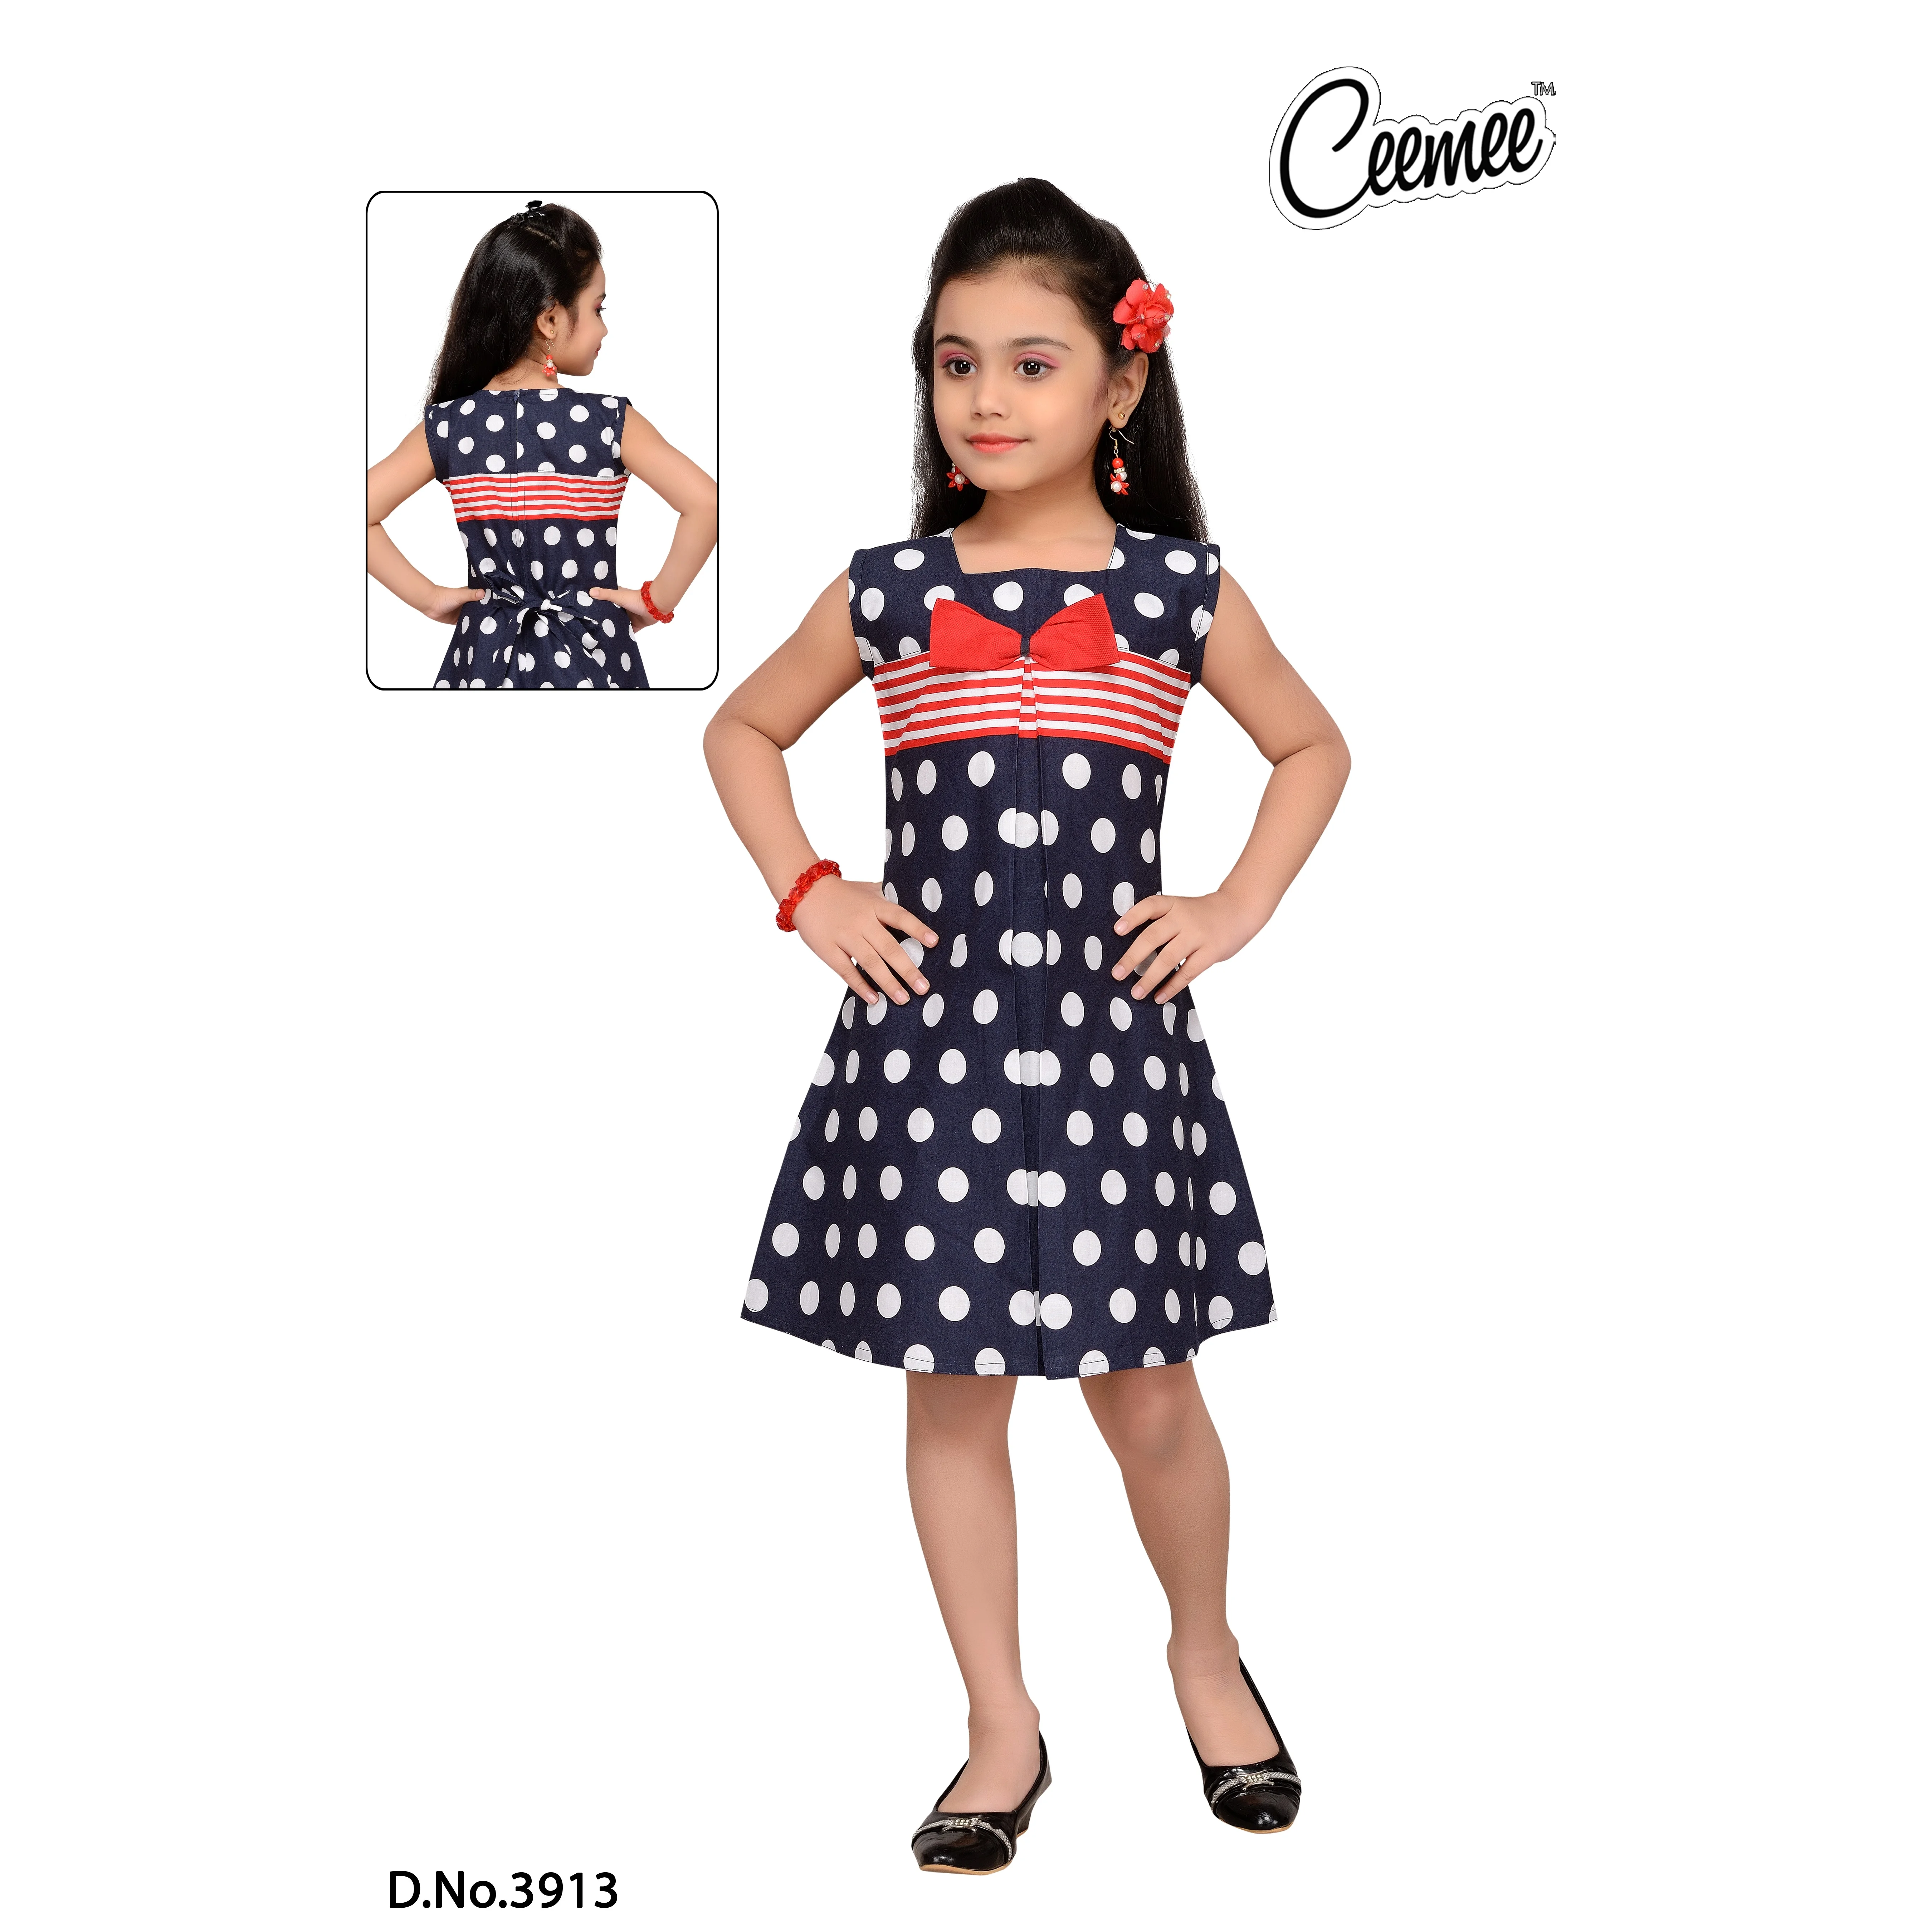 girls frock new